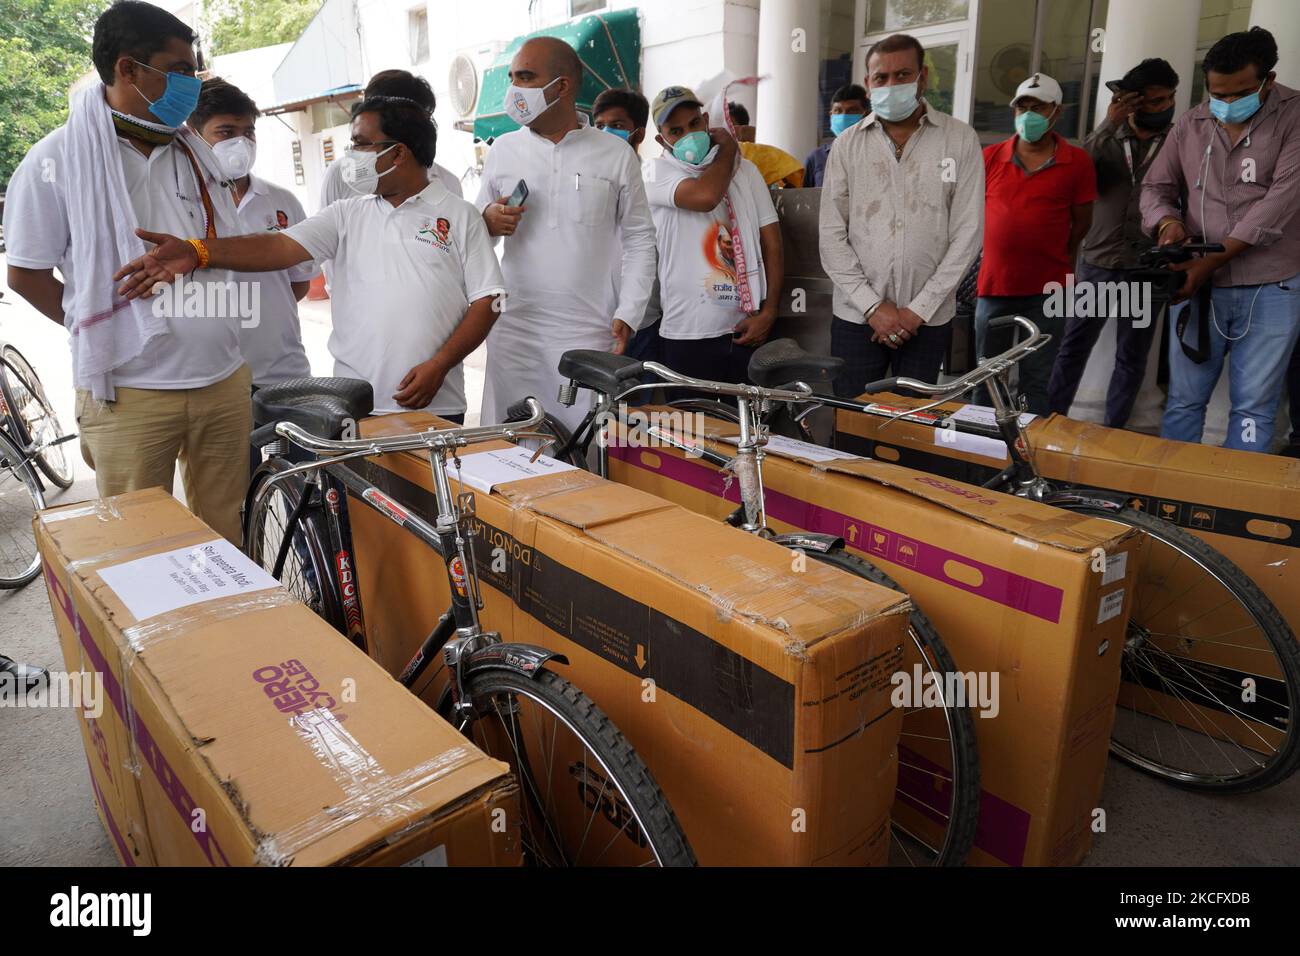 Indian Youth Congress (IYC) members stand next to bicycles packed to be sent to different ministers in the Indian government as a sign of protest against the rising fuel prices, in New Delhi, India on June 10, 2021. (Photo by Mayank Makhija/NurPhoto) Stock Photo